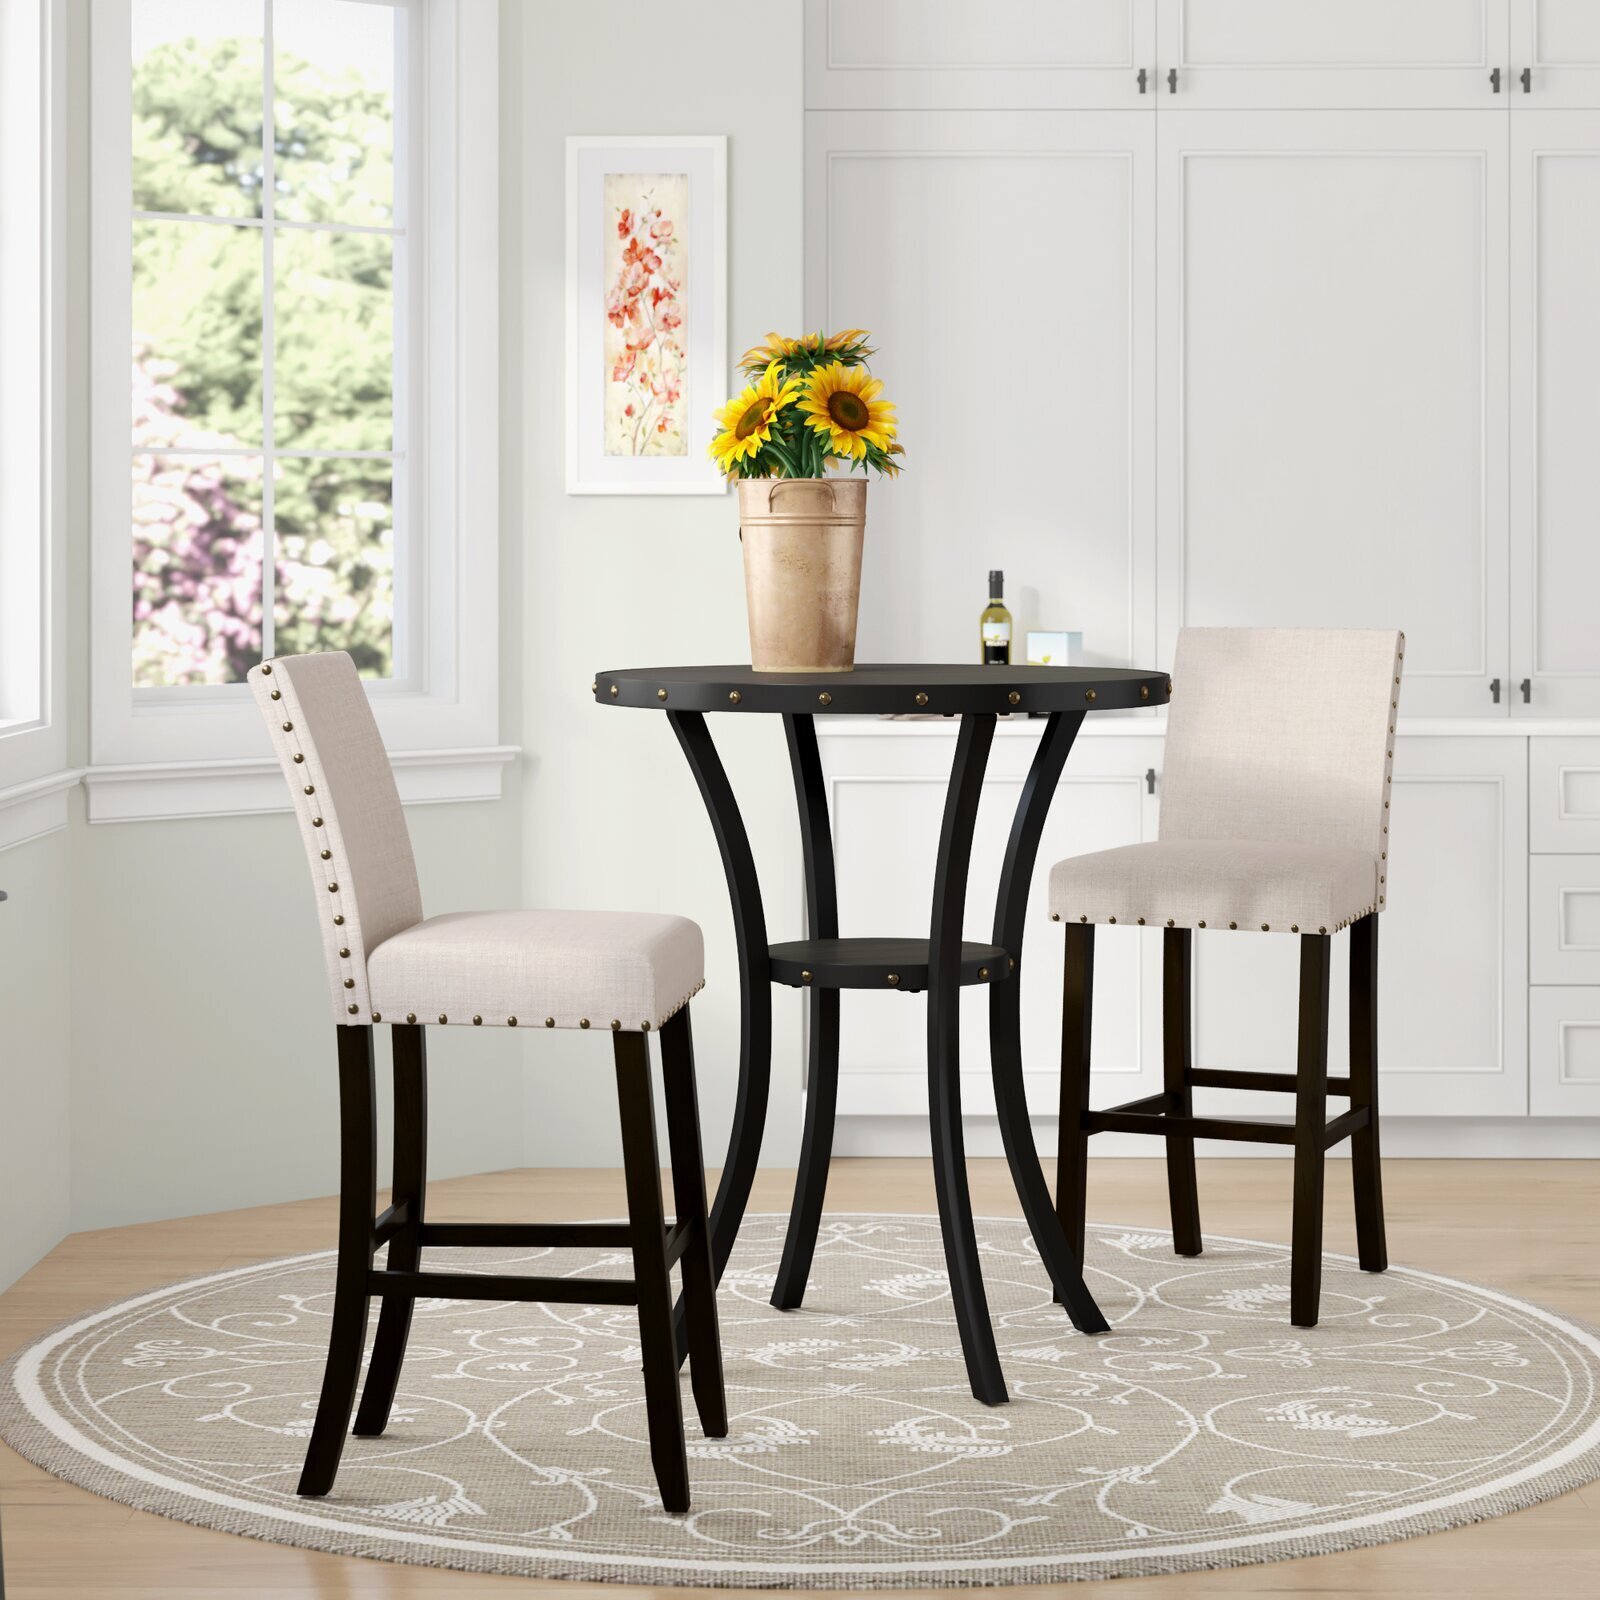 Bistro table with storage and comfy stools